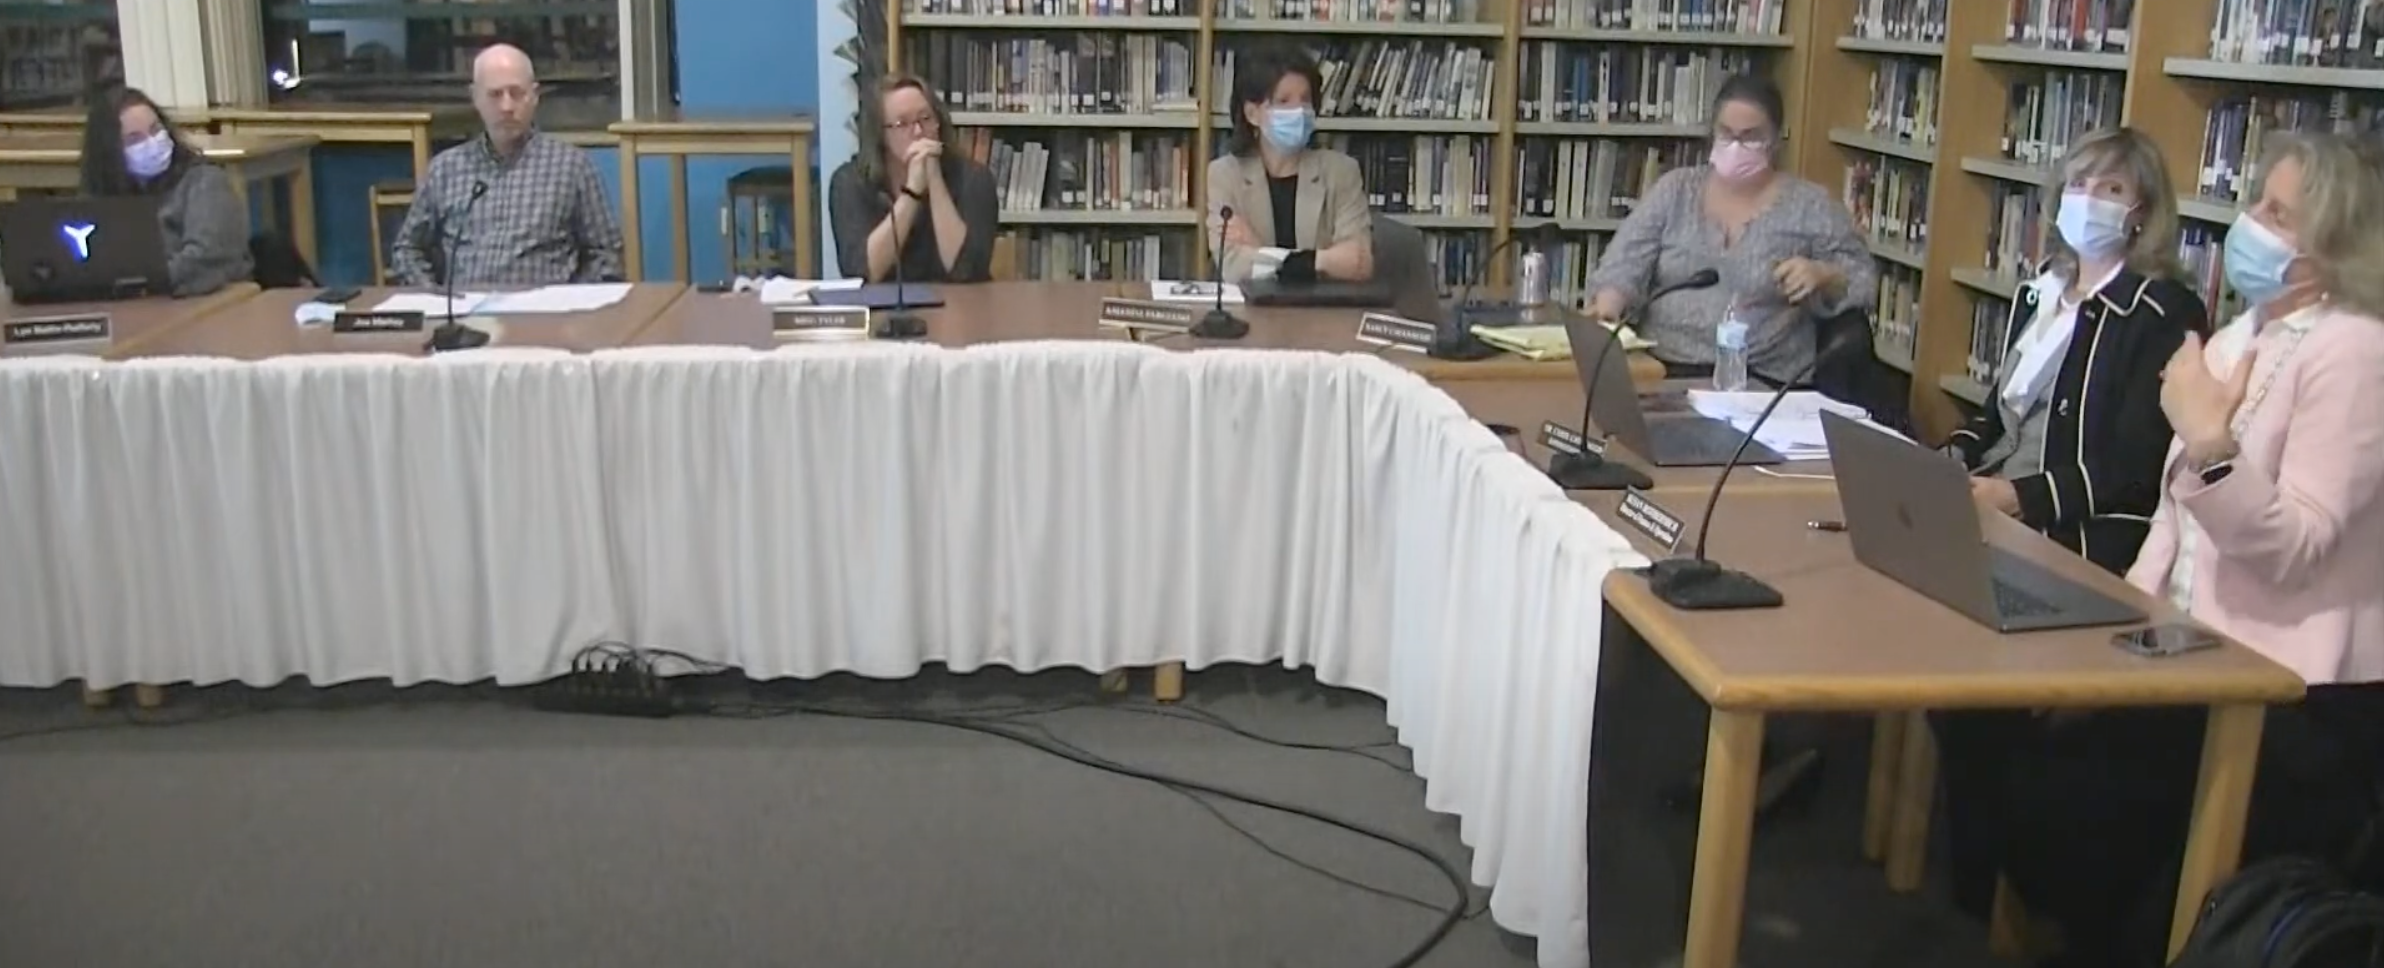 Tensions high at School Committee meeting despite calls for unity